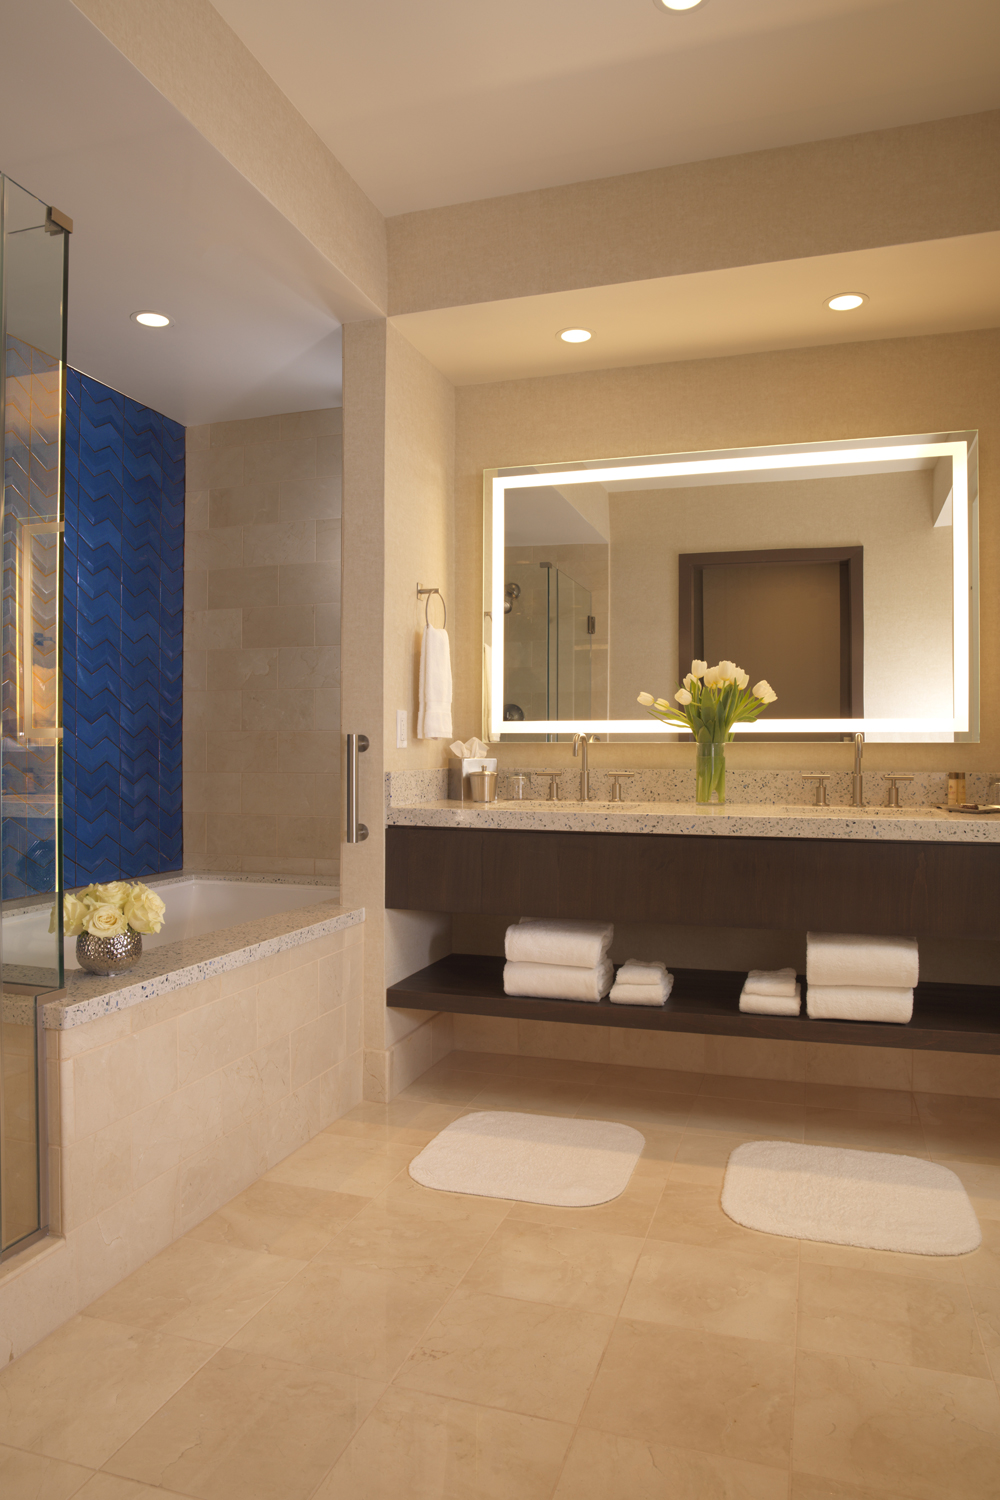 Our luxurious guest bathrooms are inviting, comfortable and stocked with all the amenities.